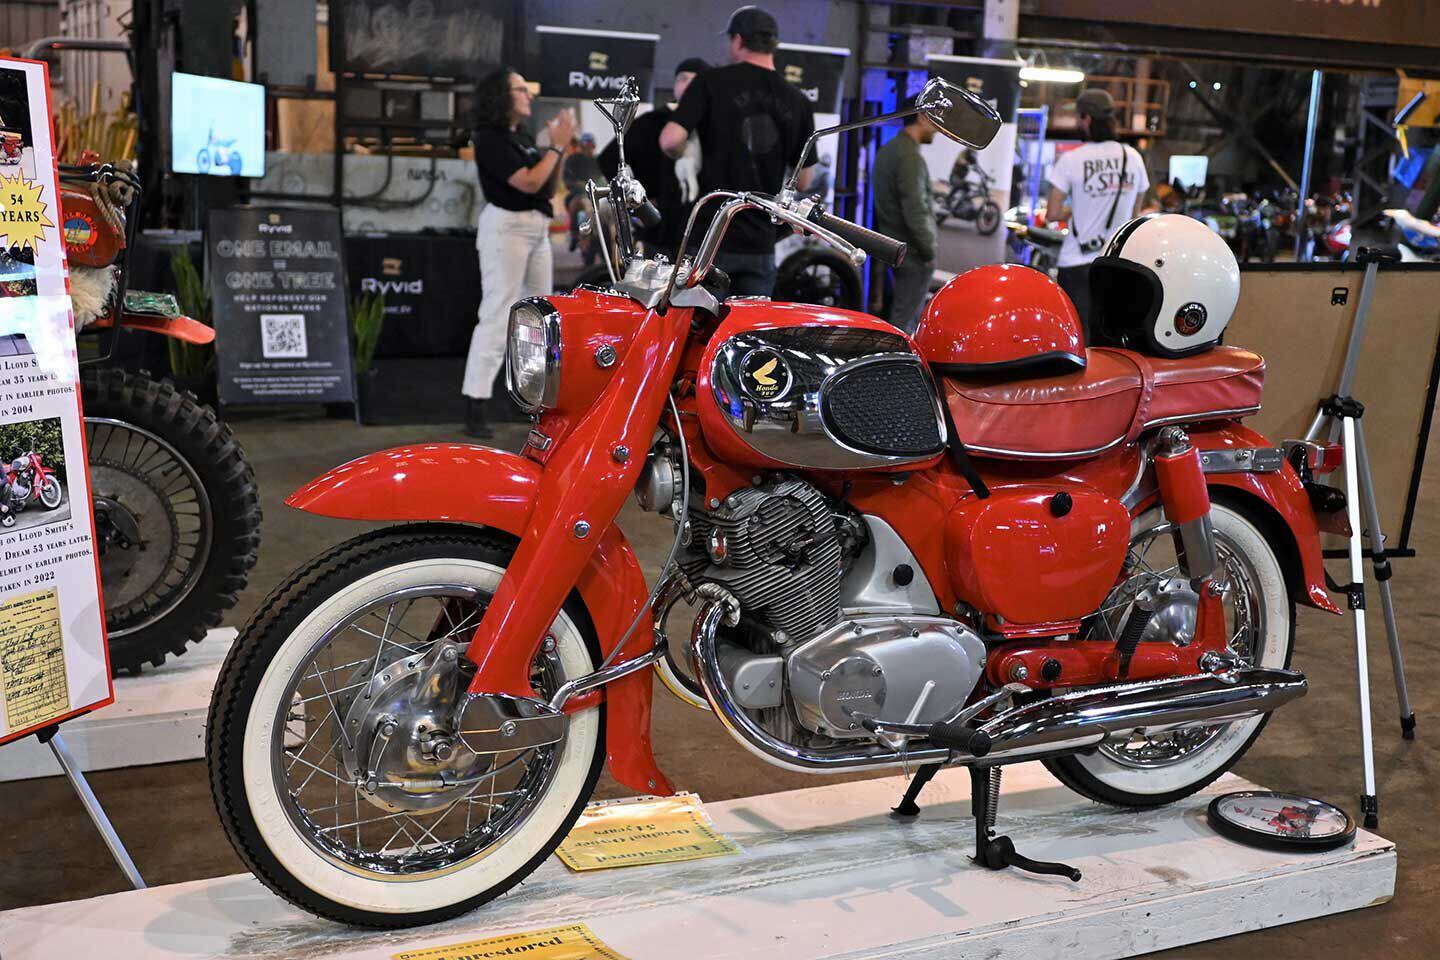 This original 1960 Honda Dream 300 came accompanied by its entire 60-year-old history, all on display.